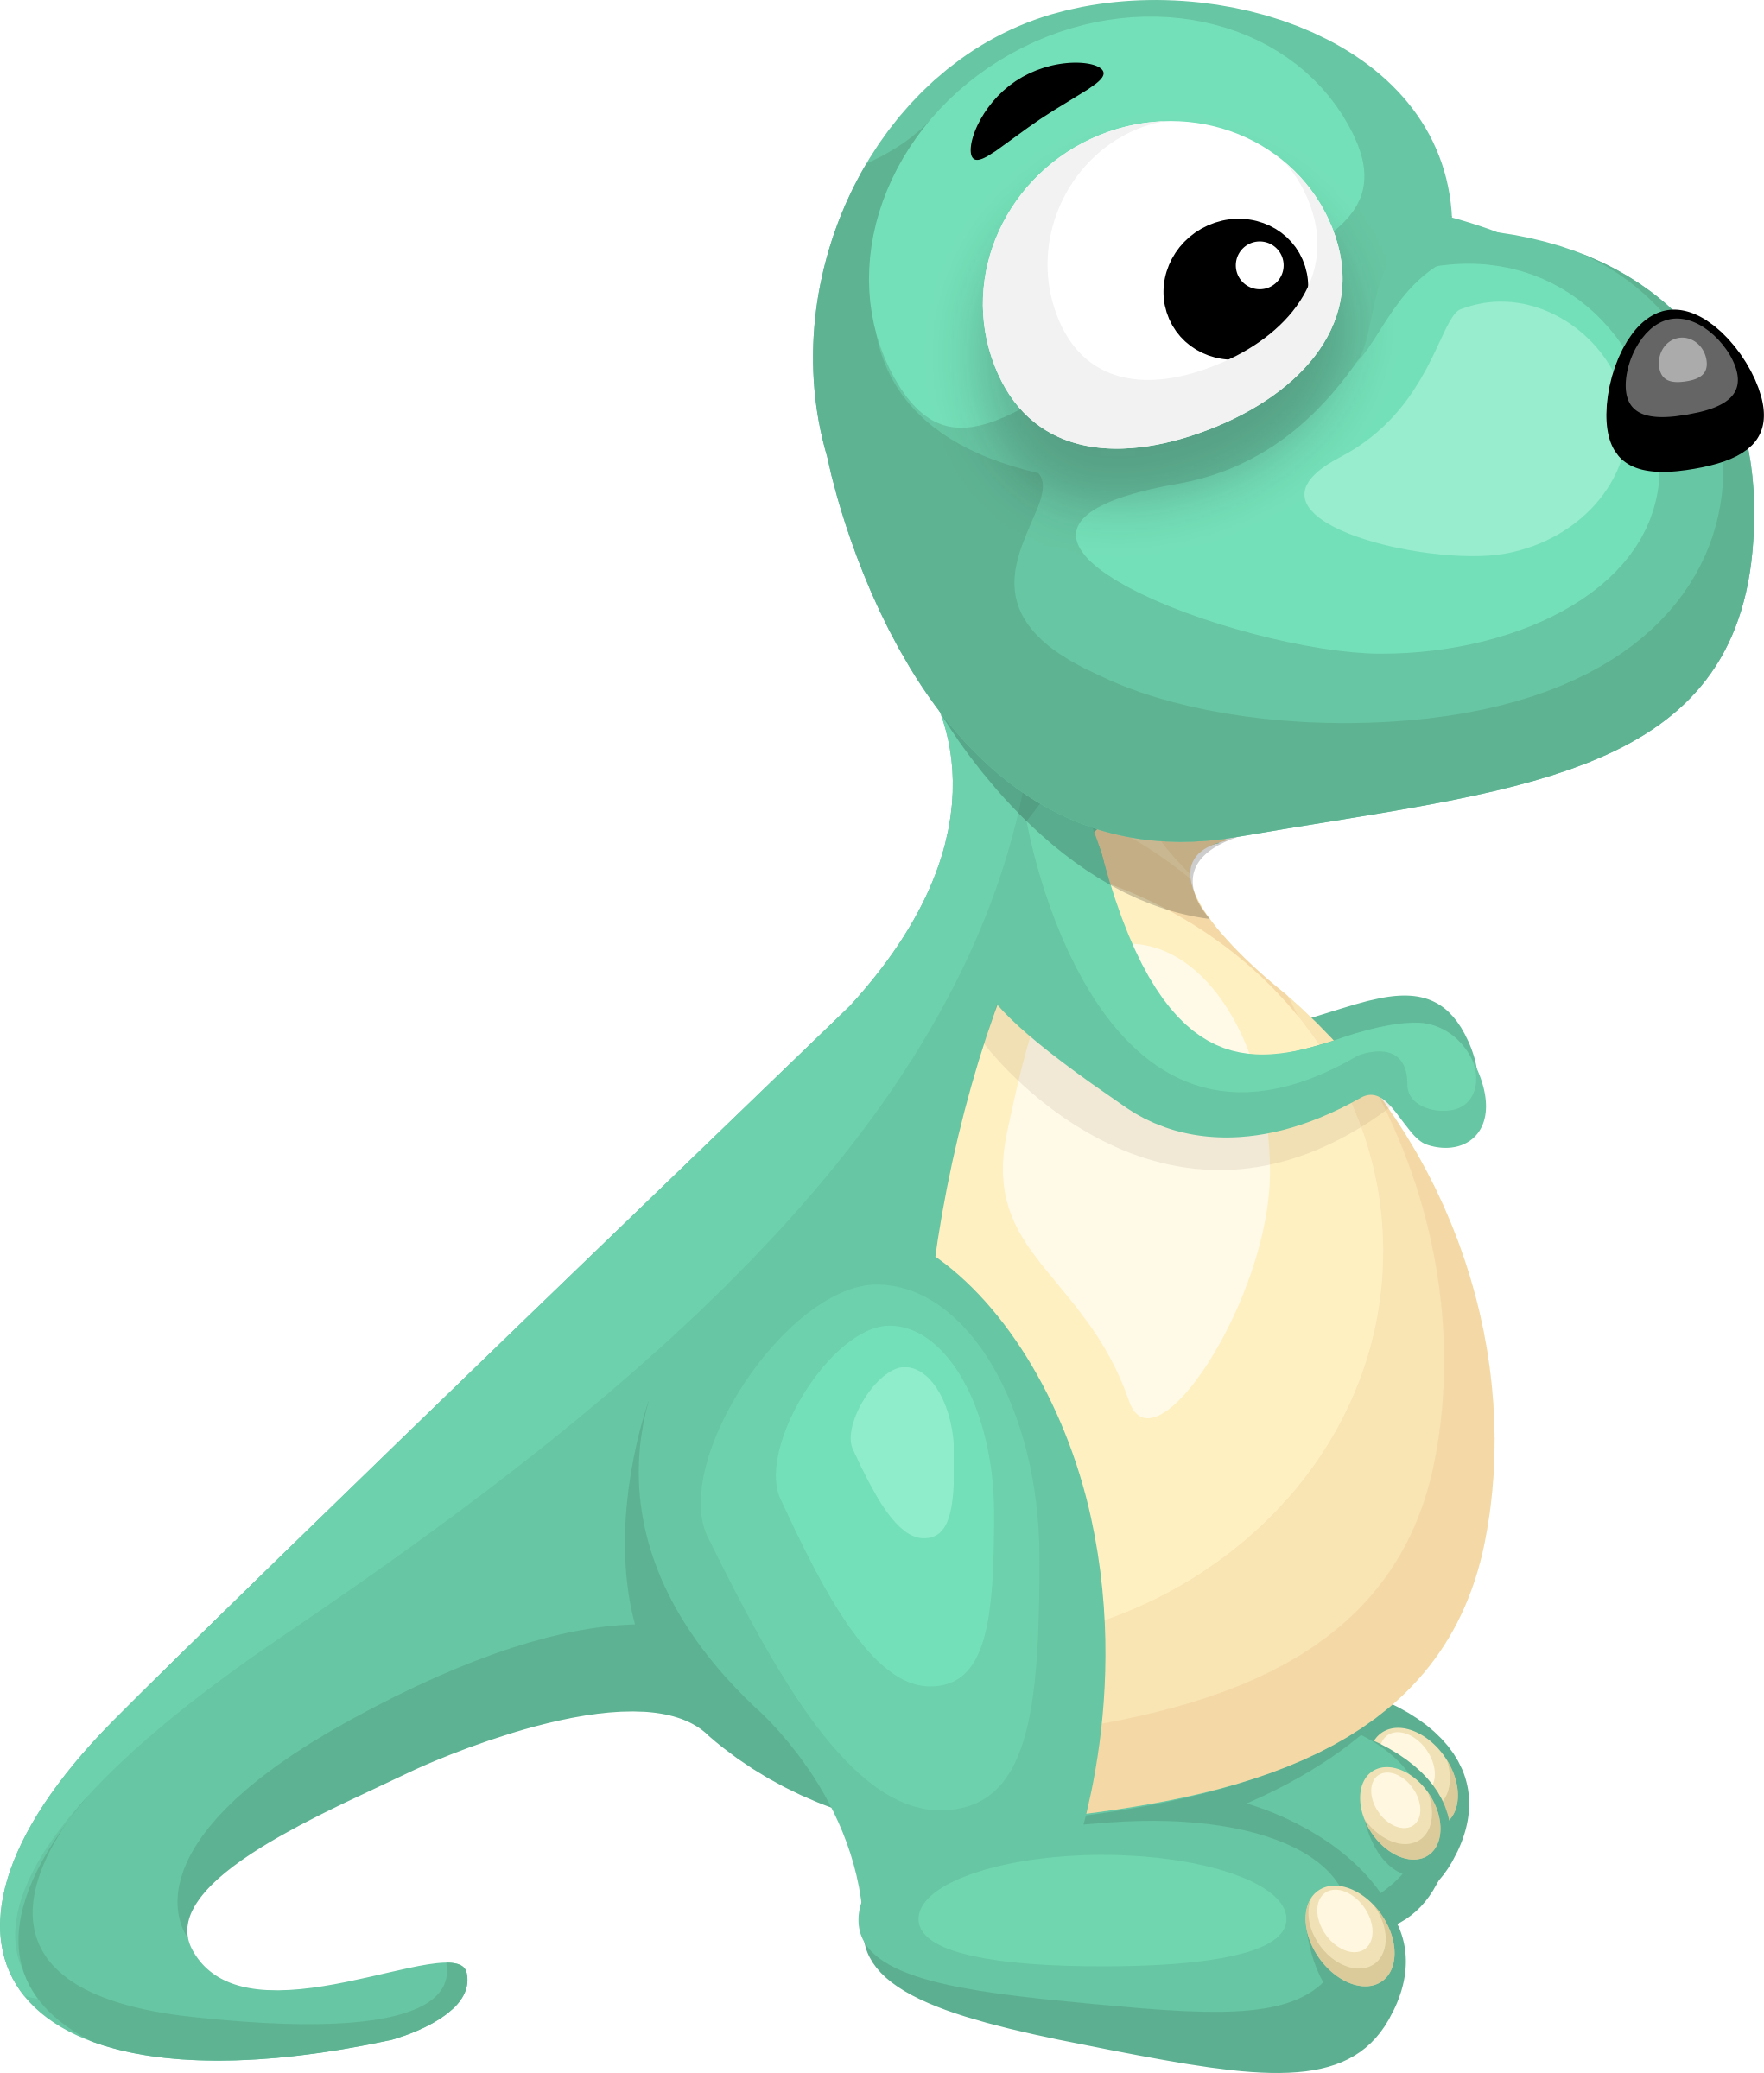 Download Turquoise Dinosaur Vector Clipart image - Free stock photo ...